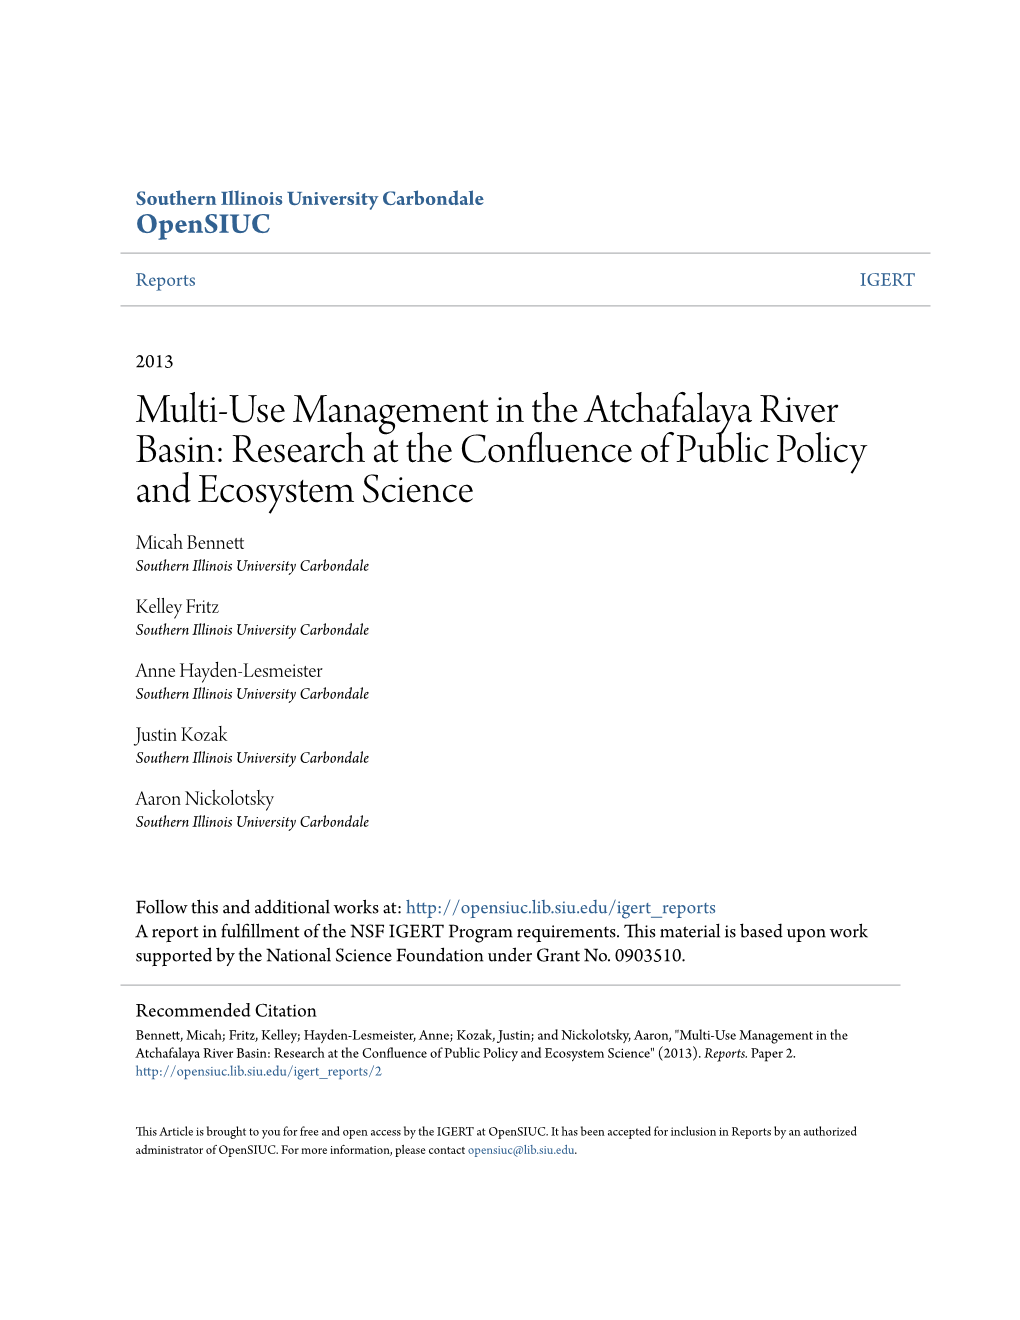 Multi-Use Management in the Atchafalaya River Basin: Research at the Confluence of Public Policy and Ecosystem Science